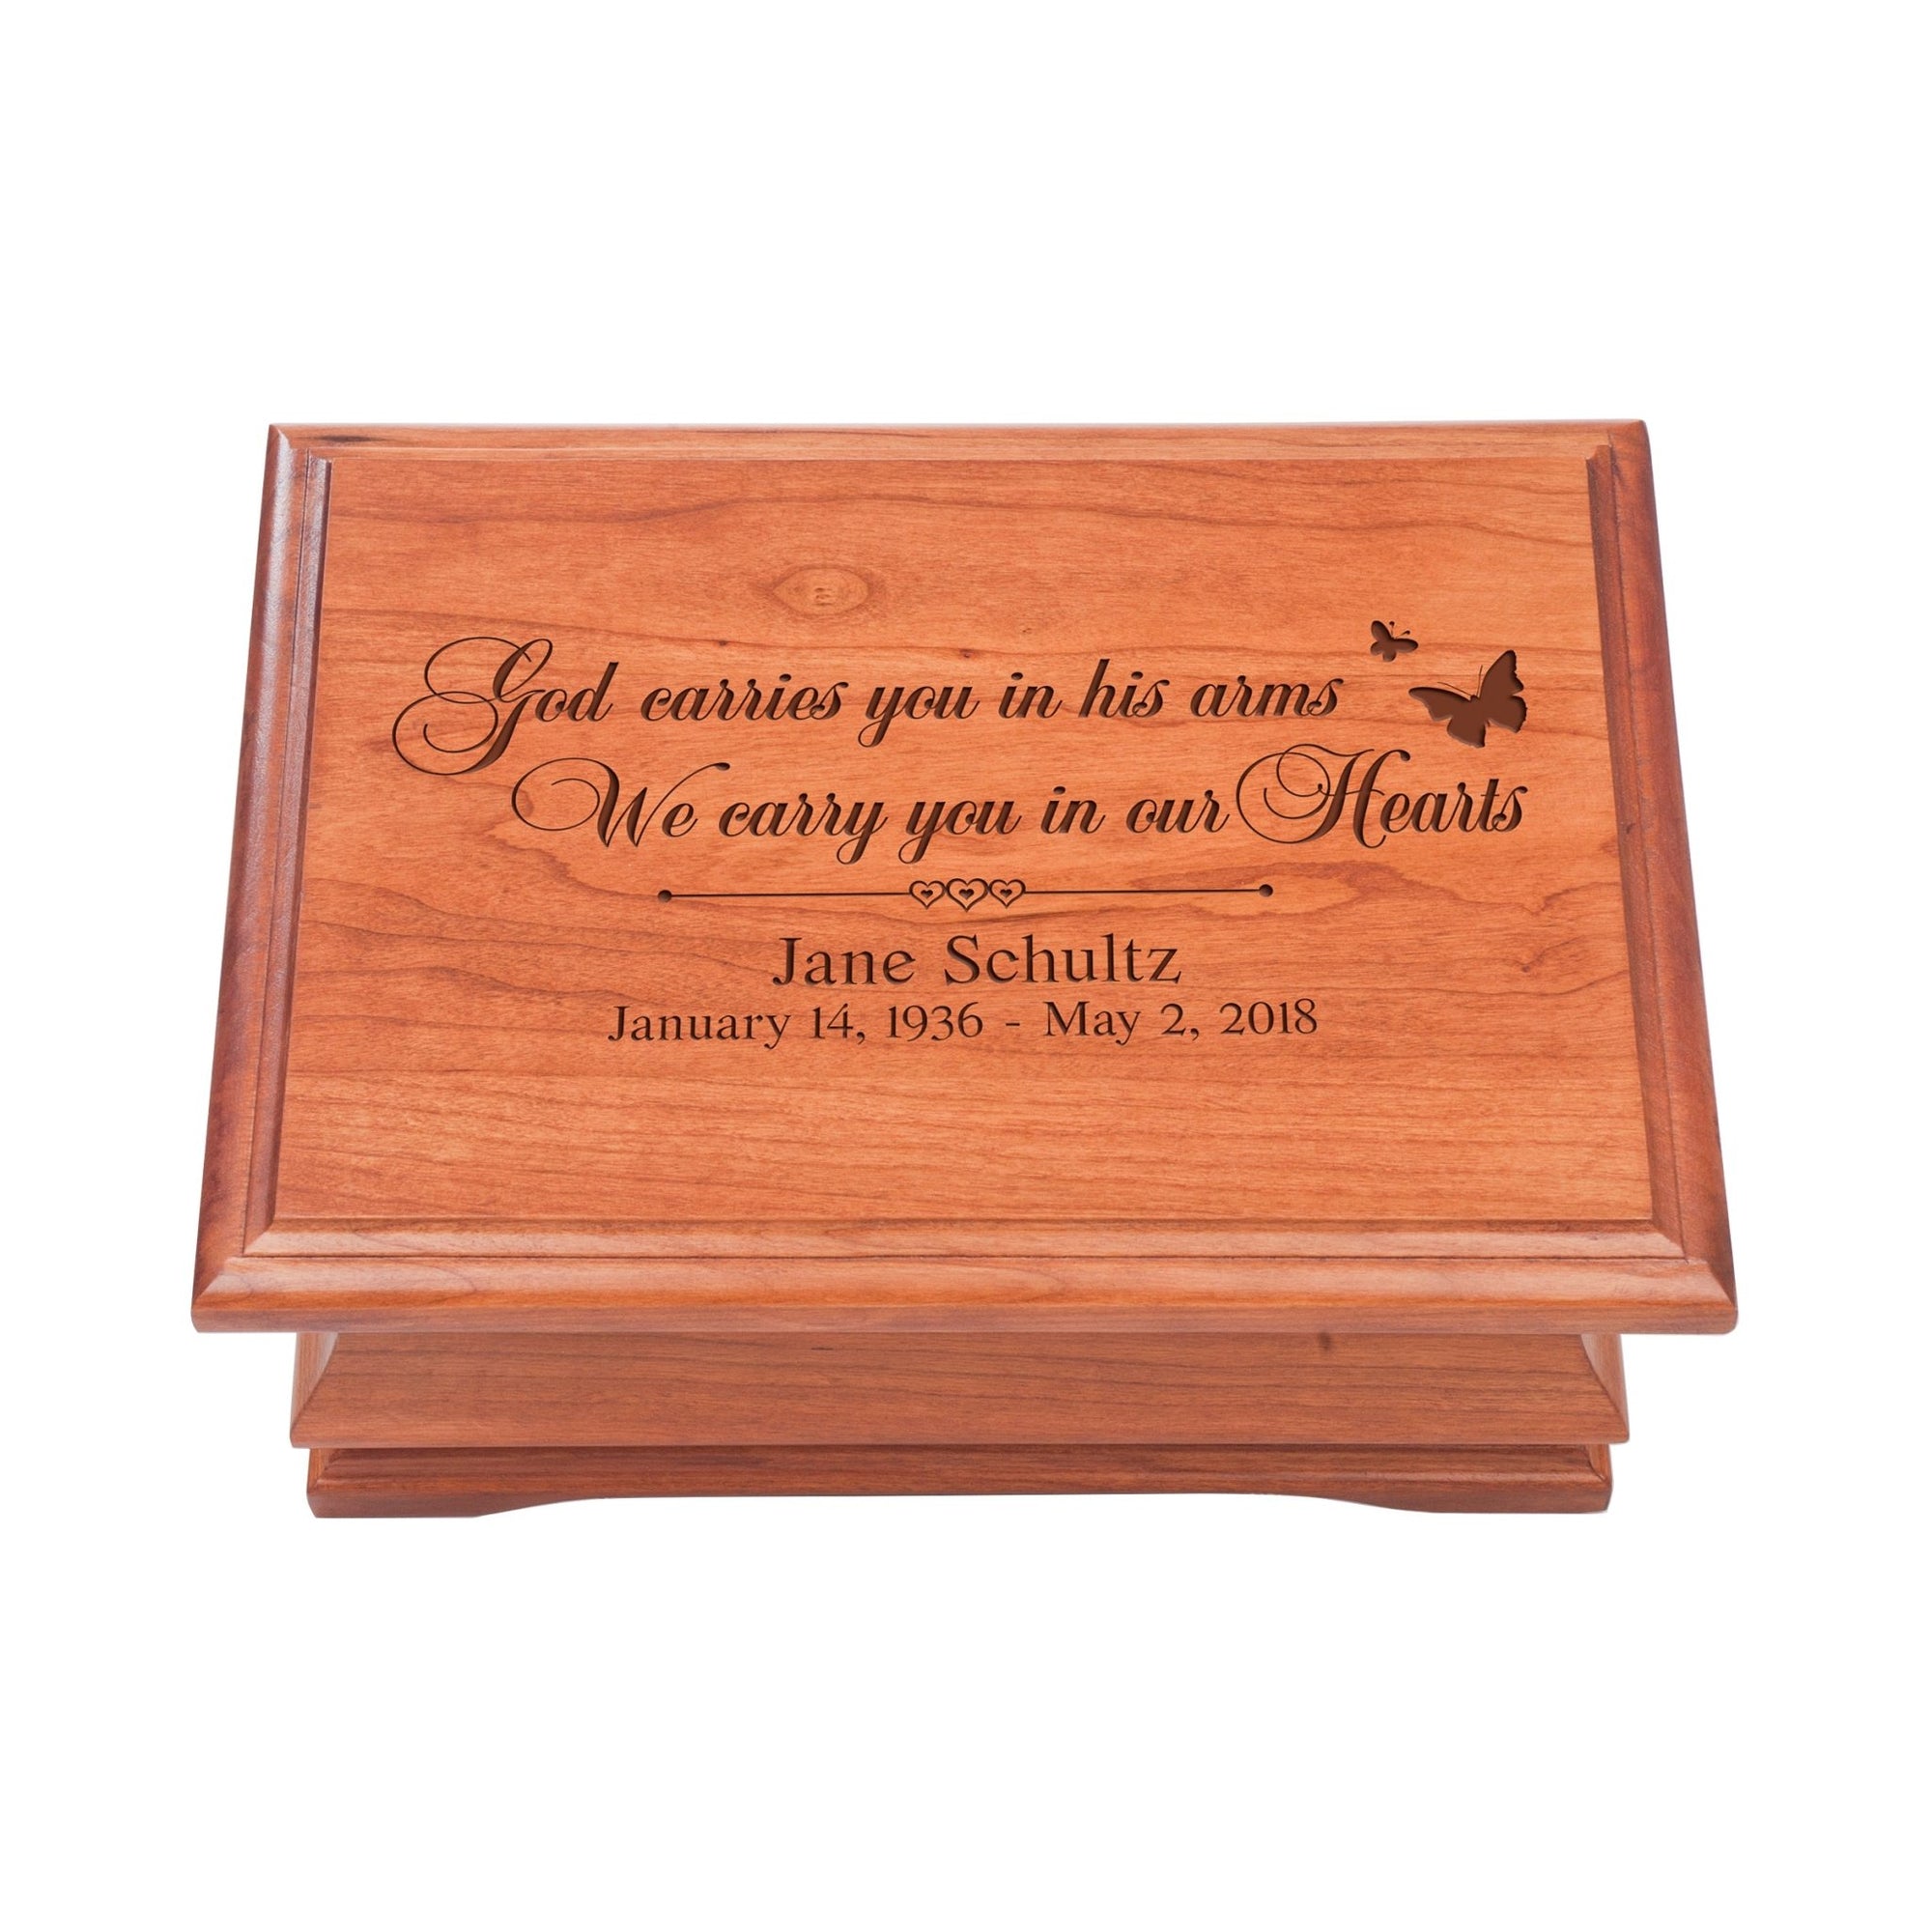 Personalized Wooden Memorial Jewelry Box Organizer 11.5x8.25 – God Carries You - LifeSong Milestones